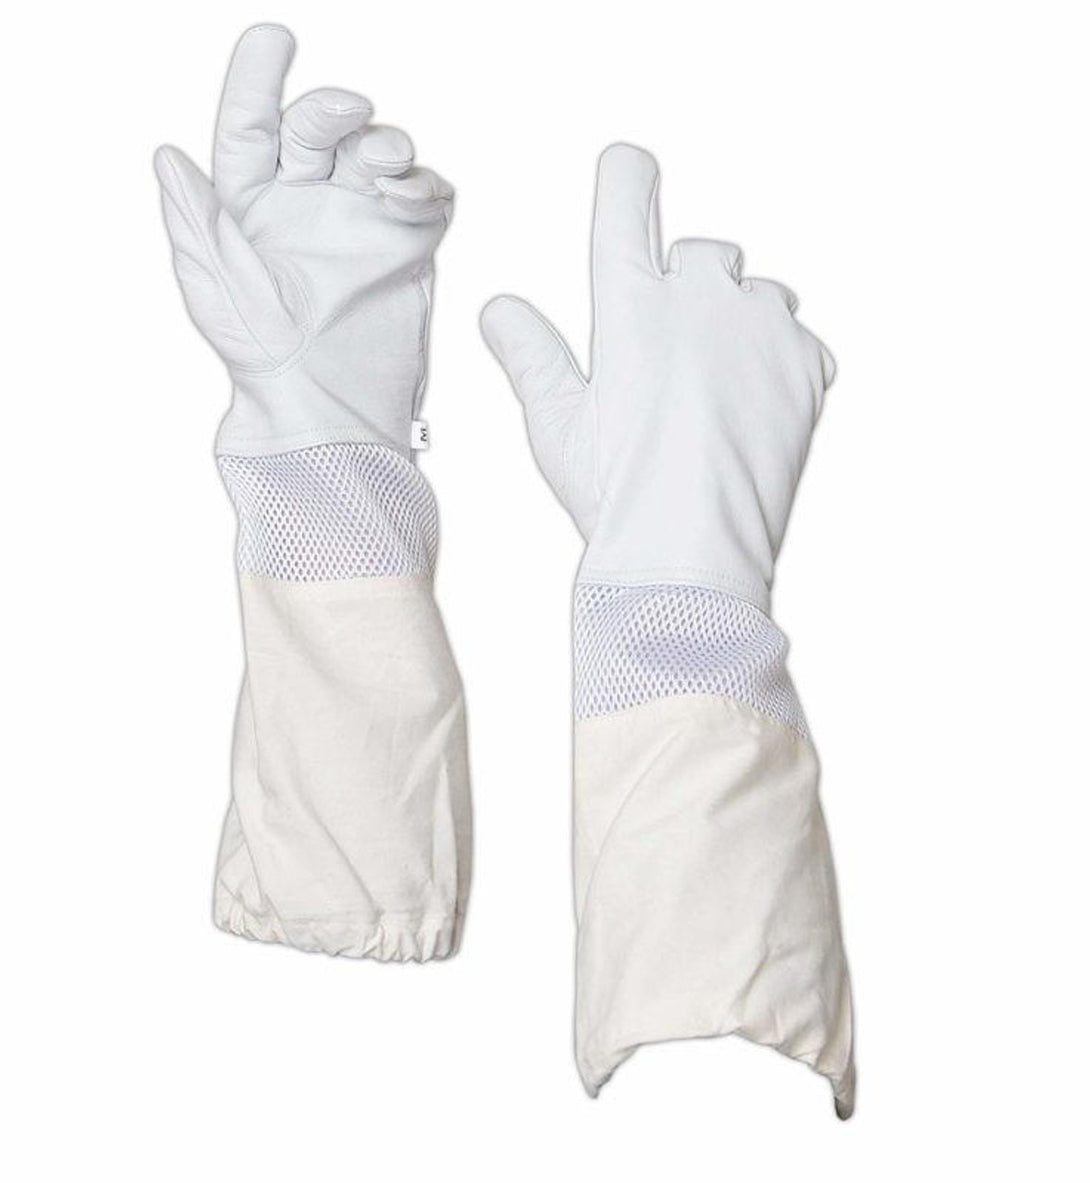 Pair of Goatskin Ventilated Gloves with reinforced fingertips, providing both airflow through the mesh back and enhanced durability for handling beekeeping tools.